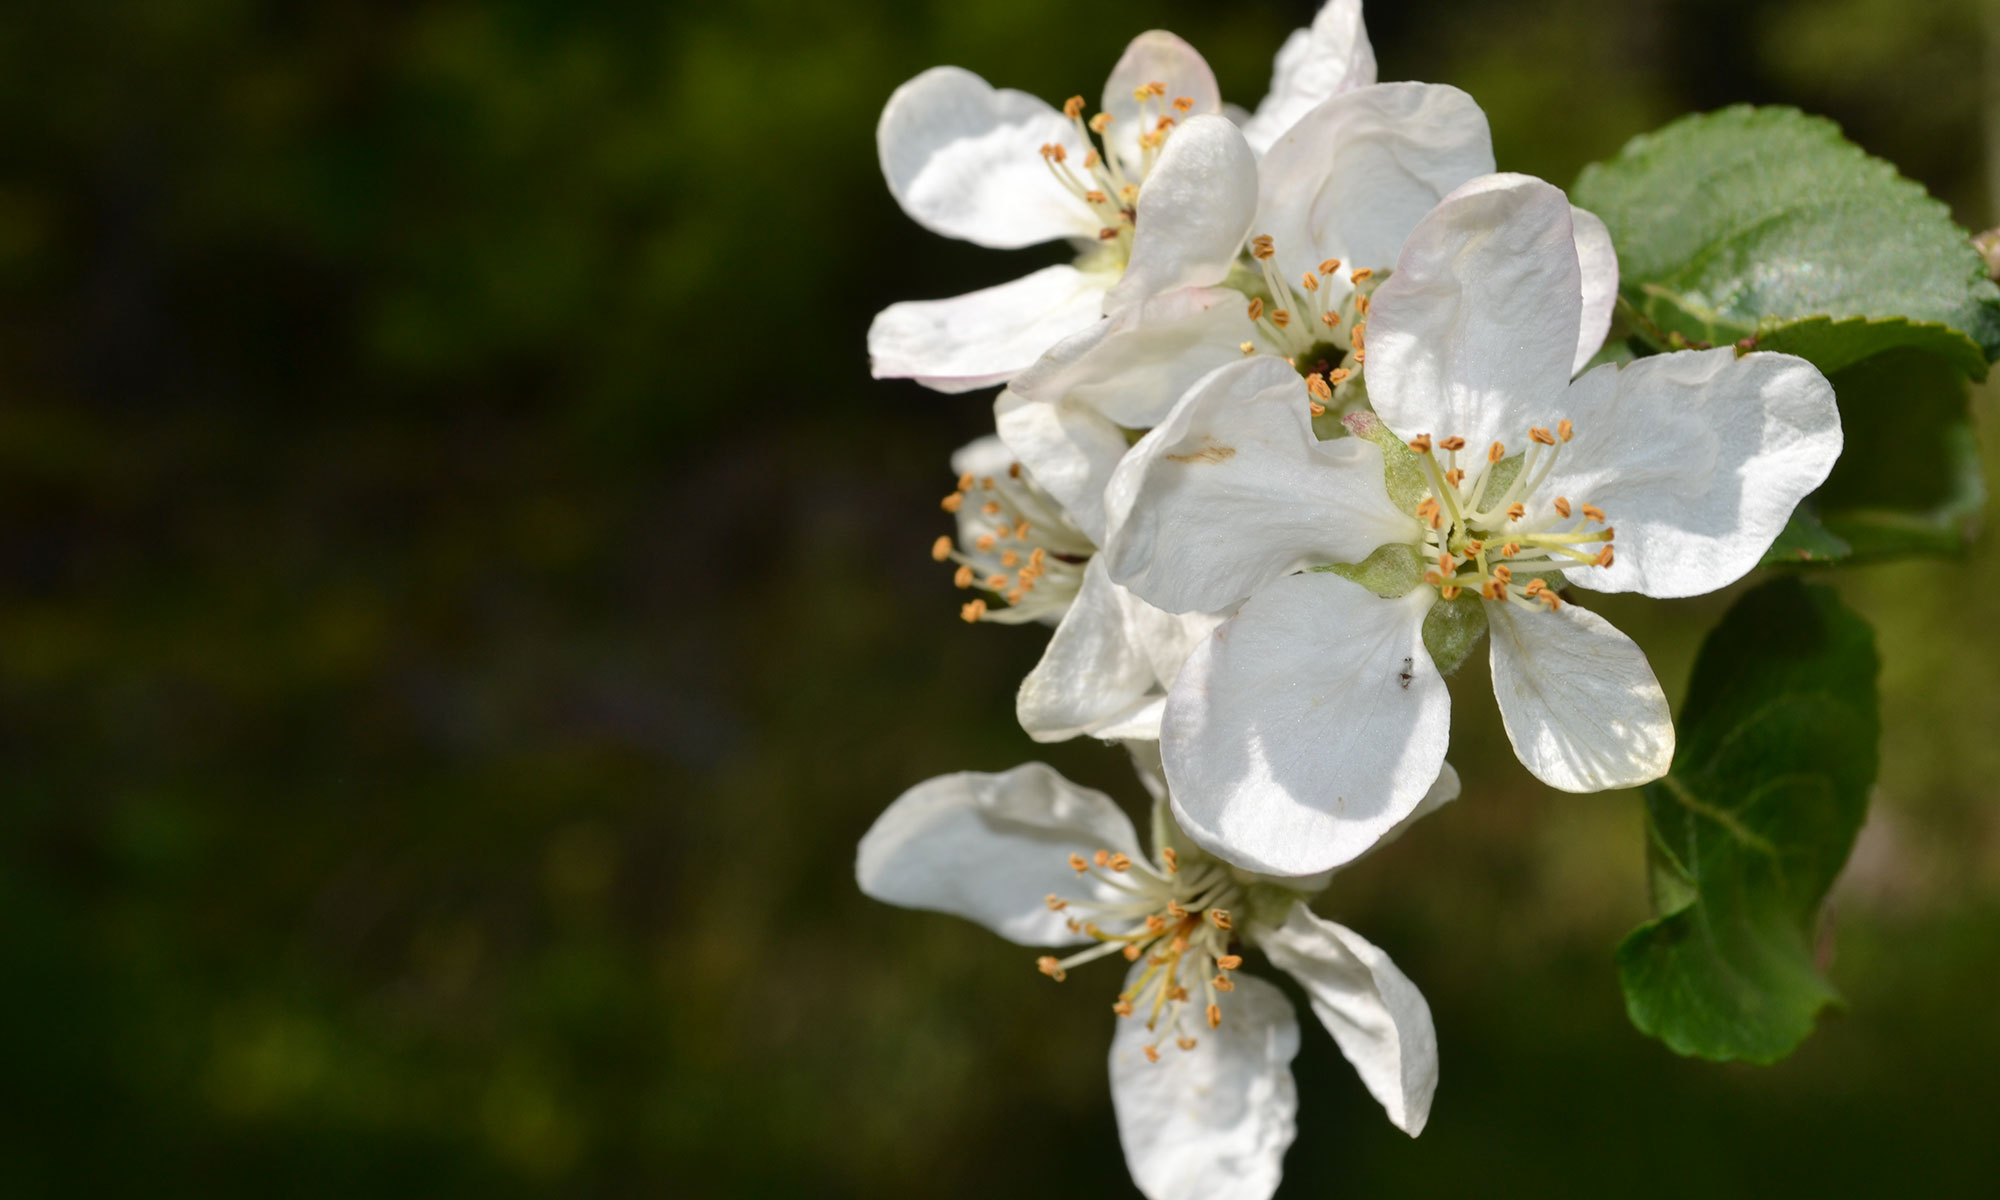 A white flower from a apple tree with a green background.